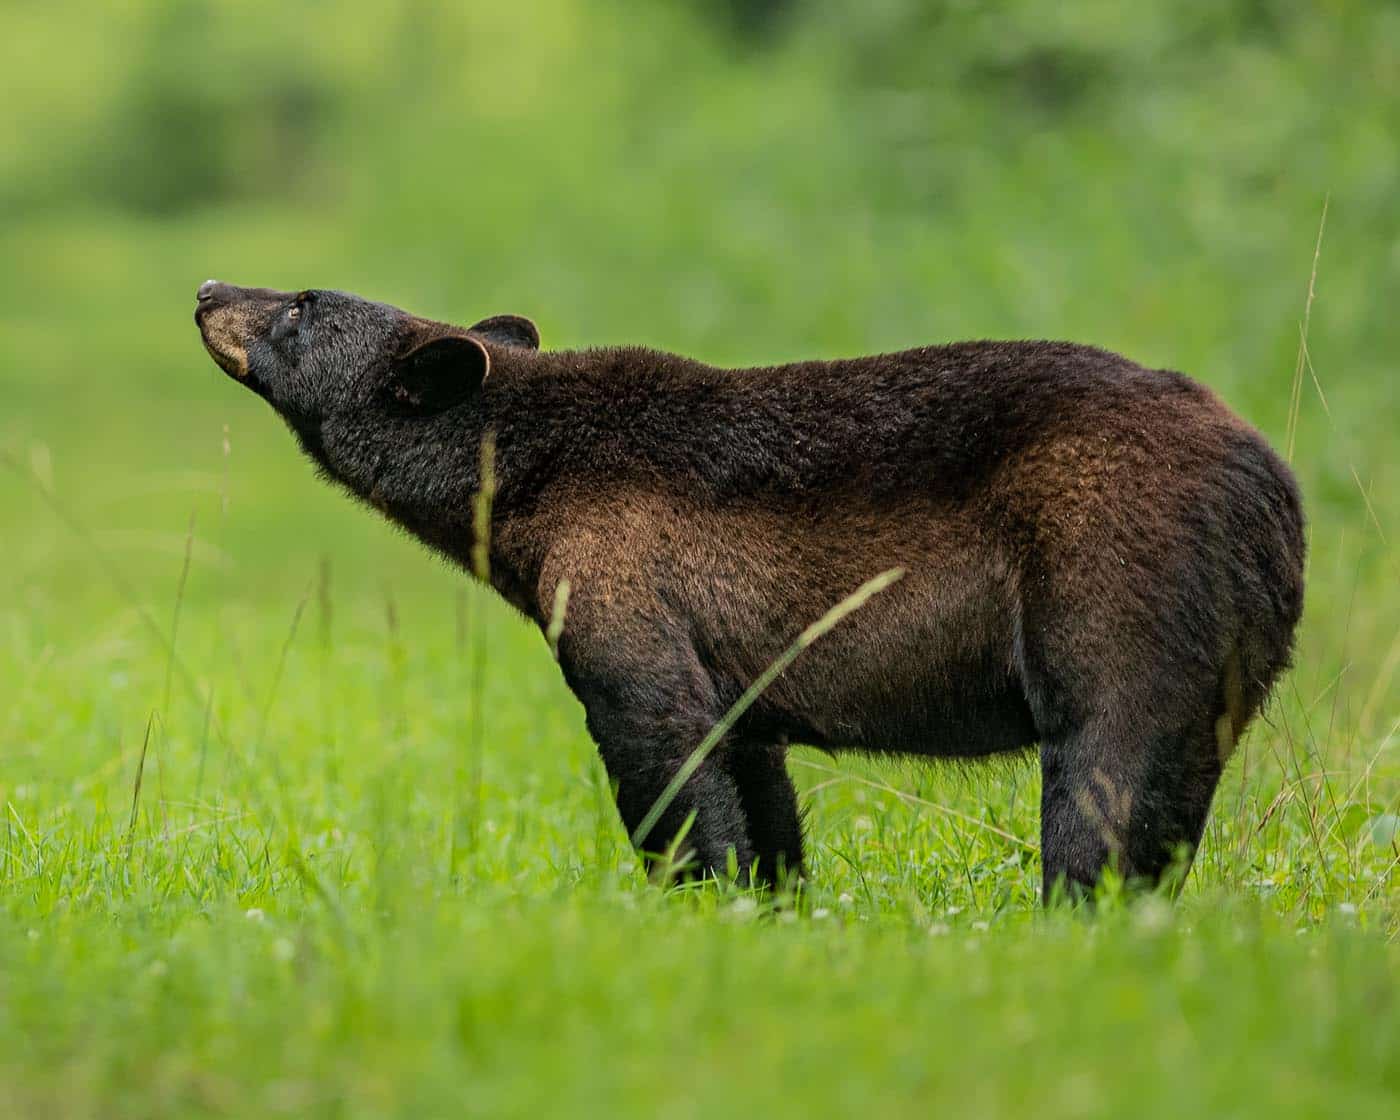 A black bear stretches its neck to look up in a meadow